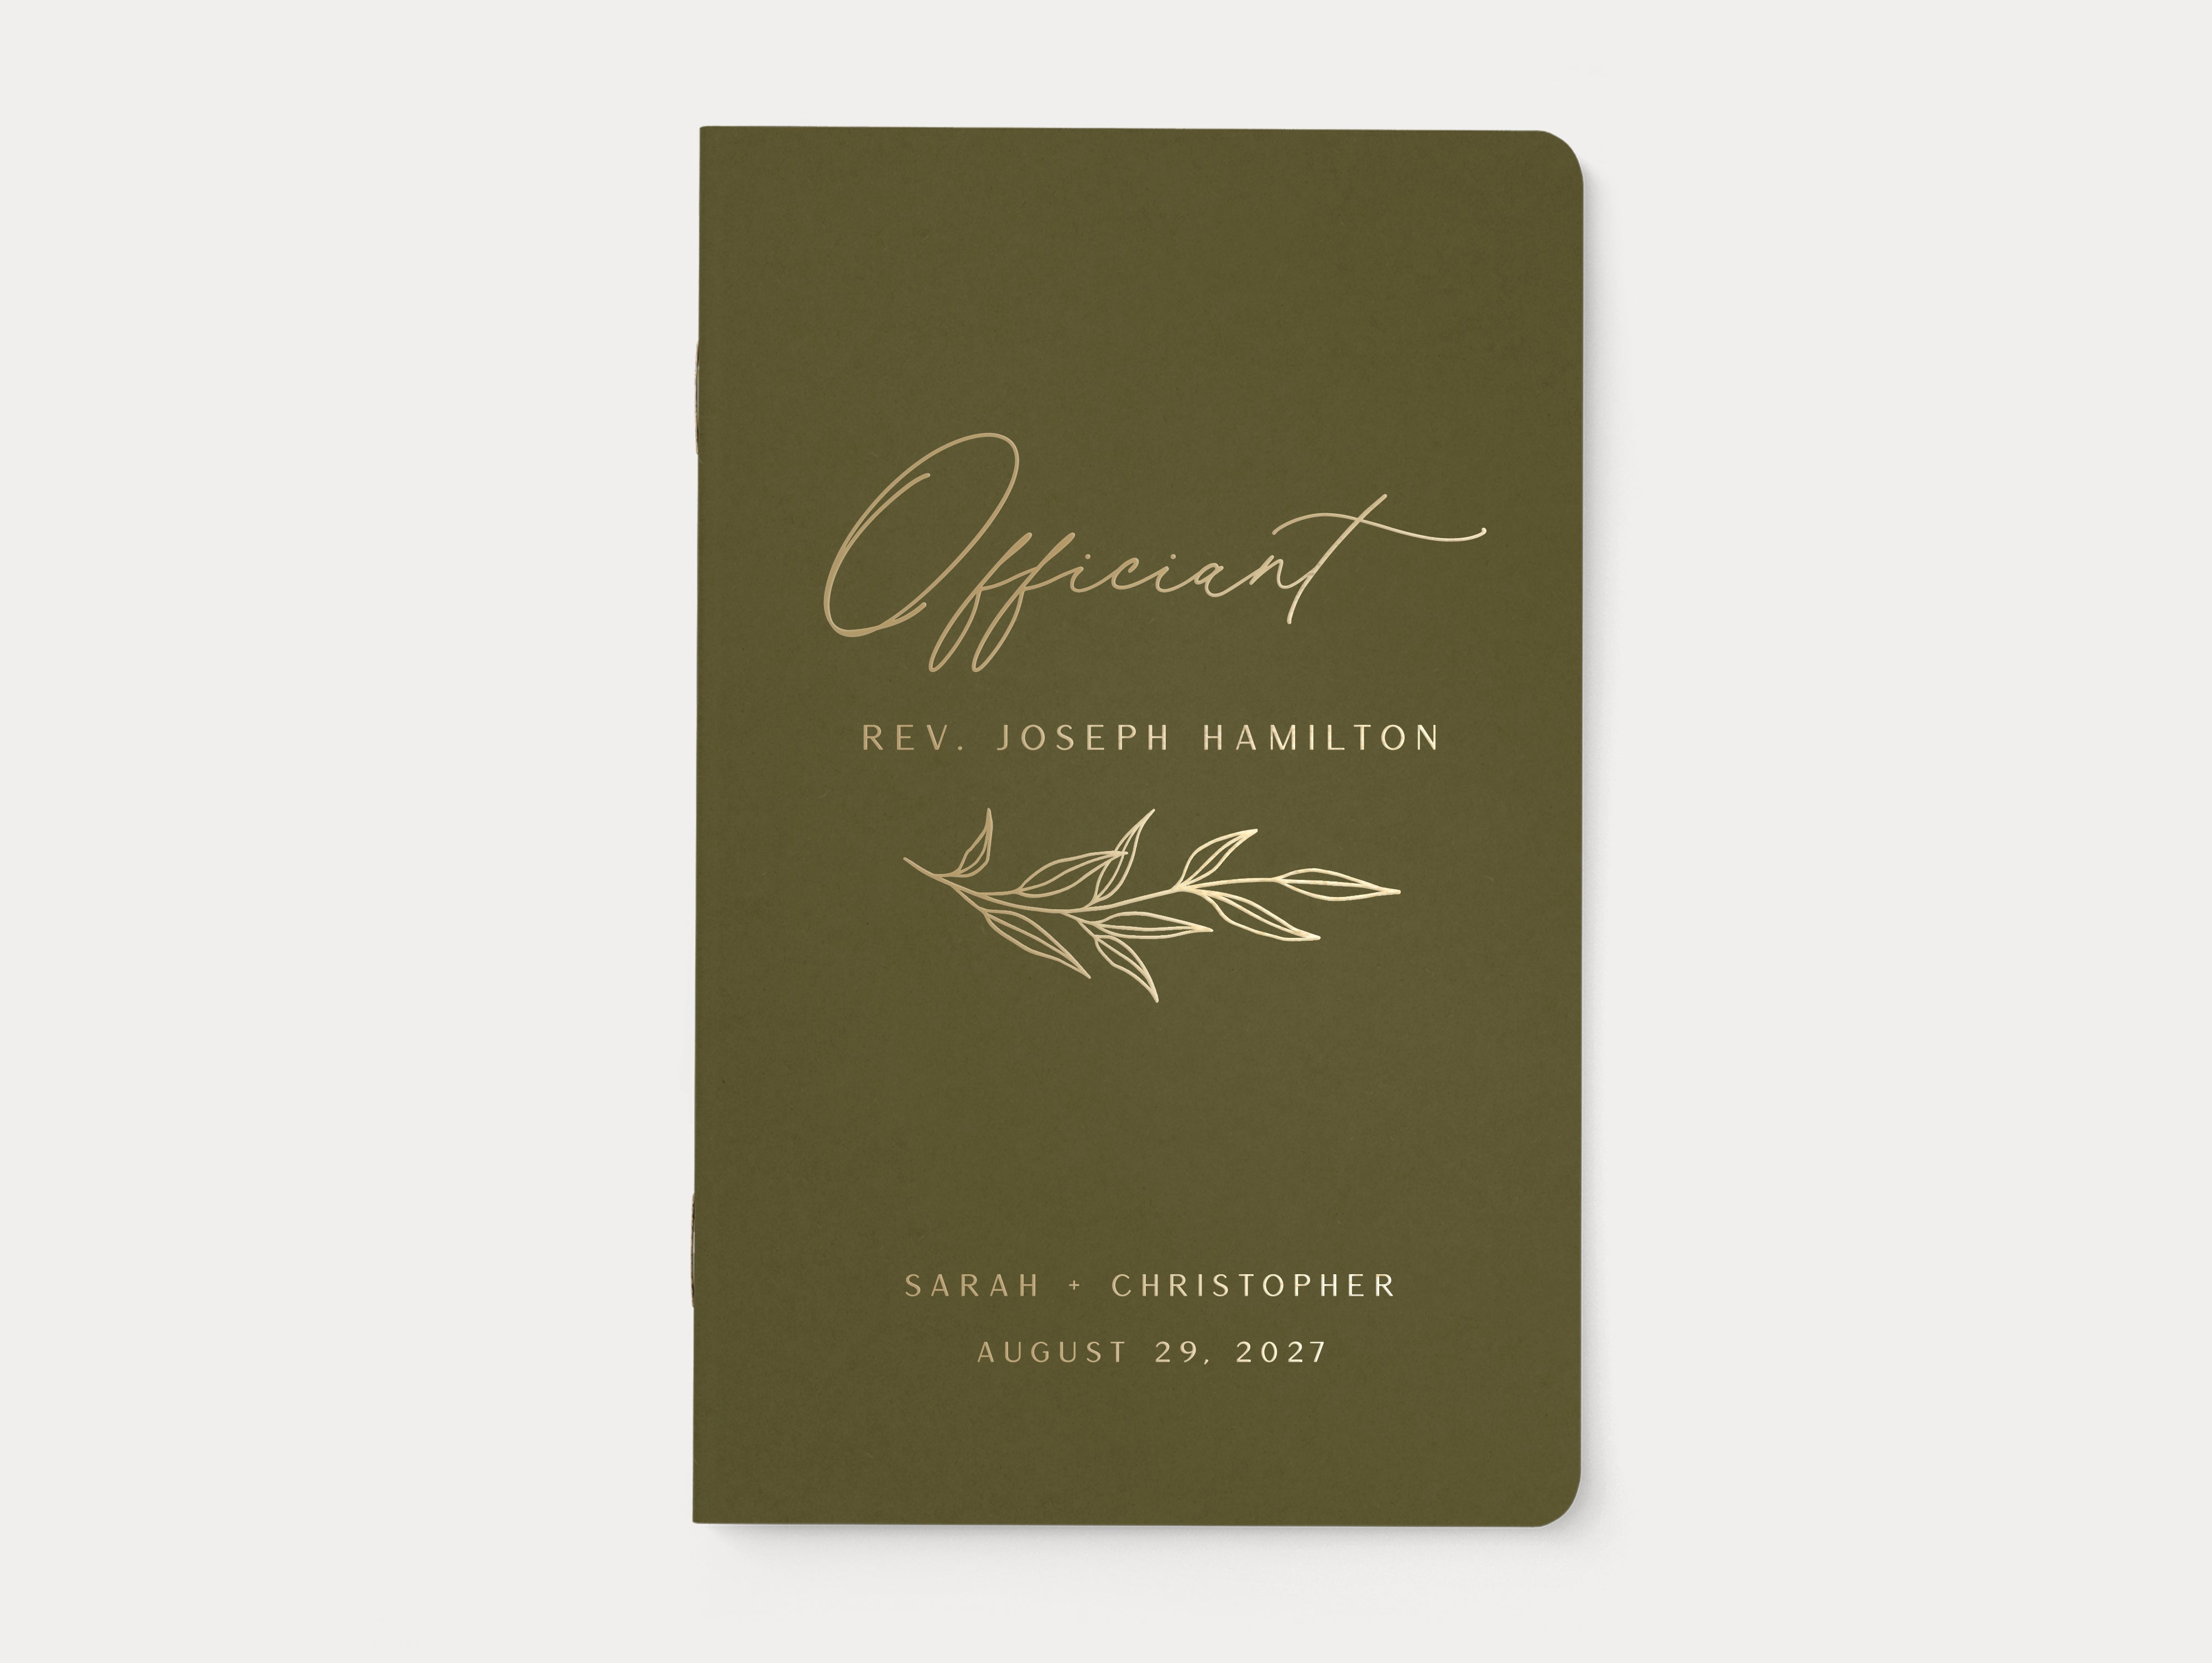 Personalized officiant booklet with leaf graphic.